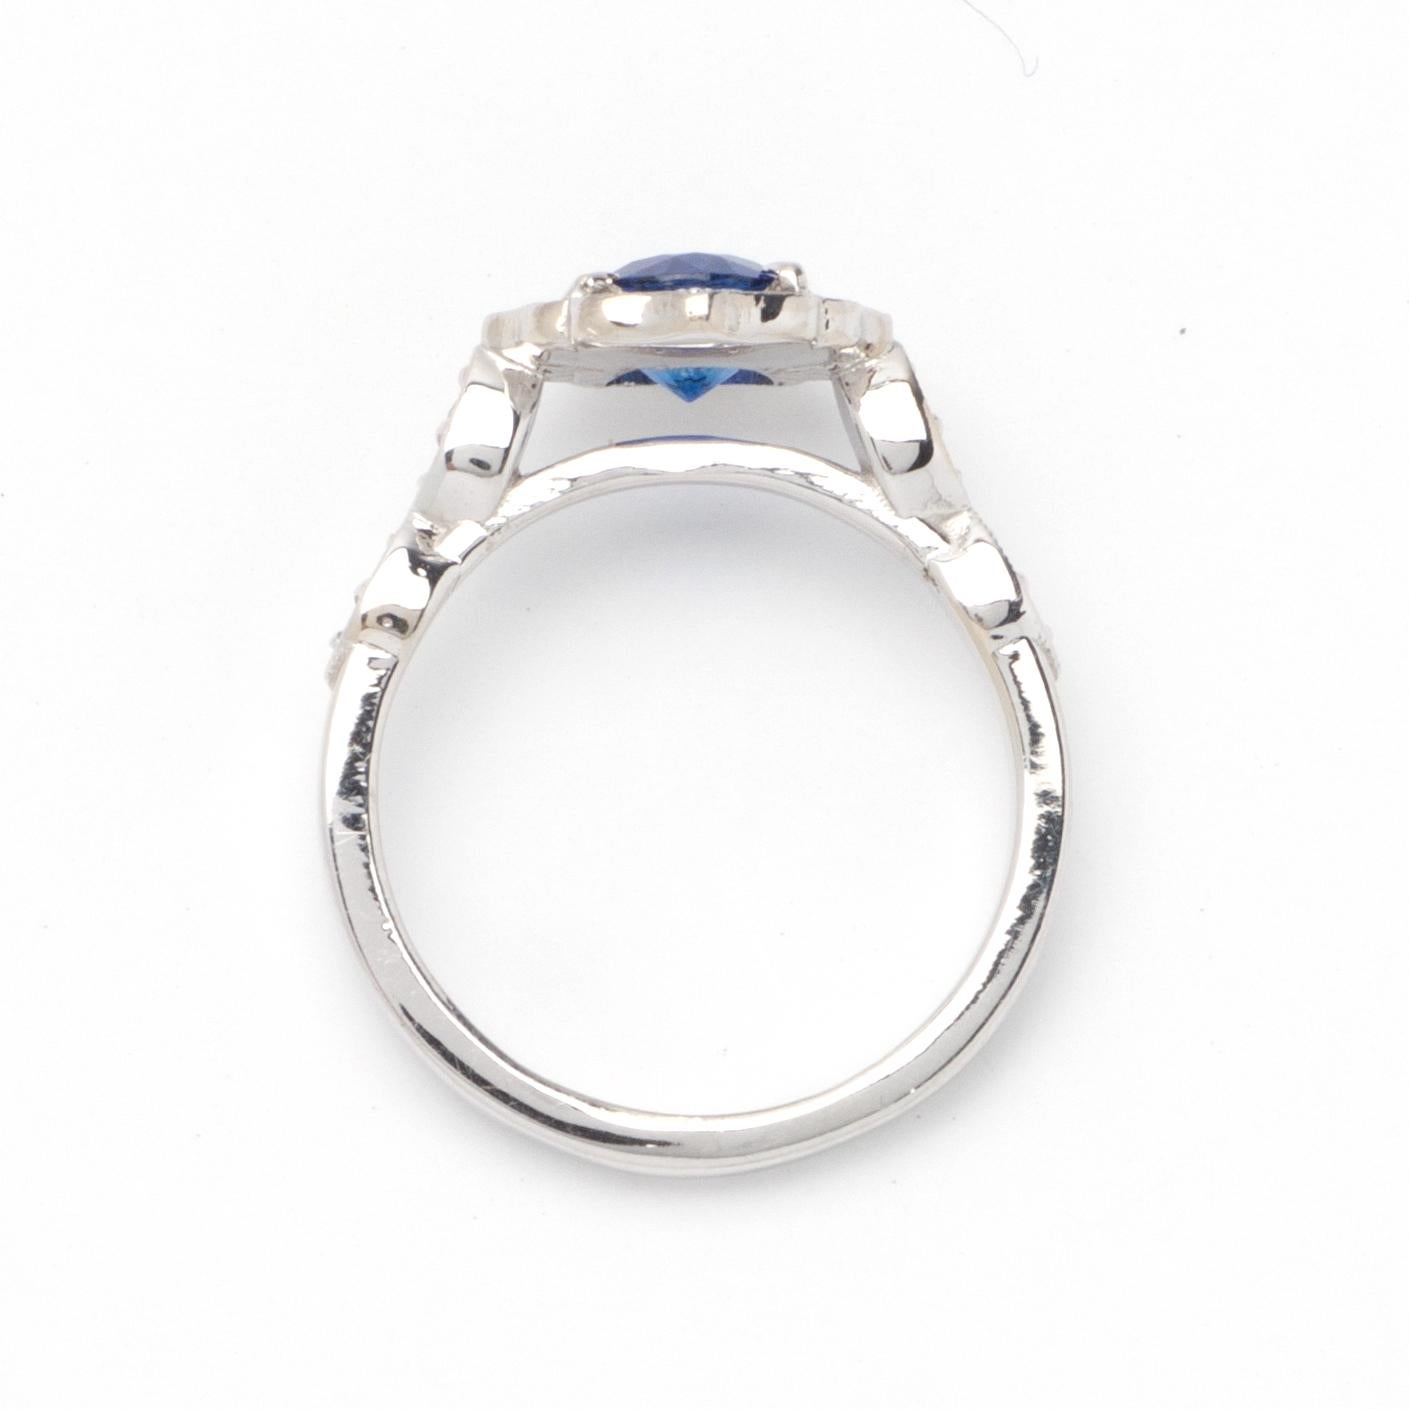 This ring features a halo design of G color, VS1 clarity, and .25ct round side diamonds set in 14K white gold. The center gemstone is a 1.06ct round blue sapphire. 